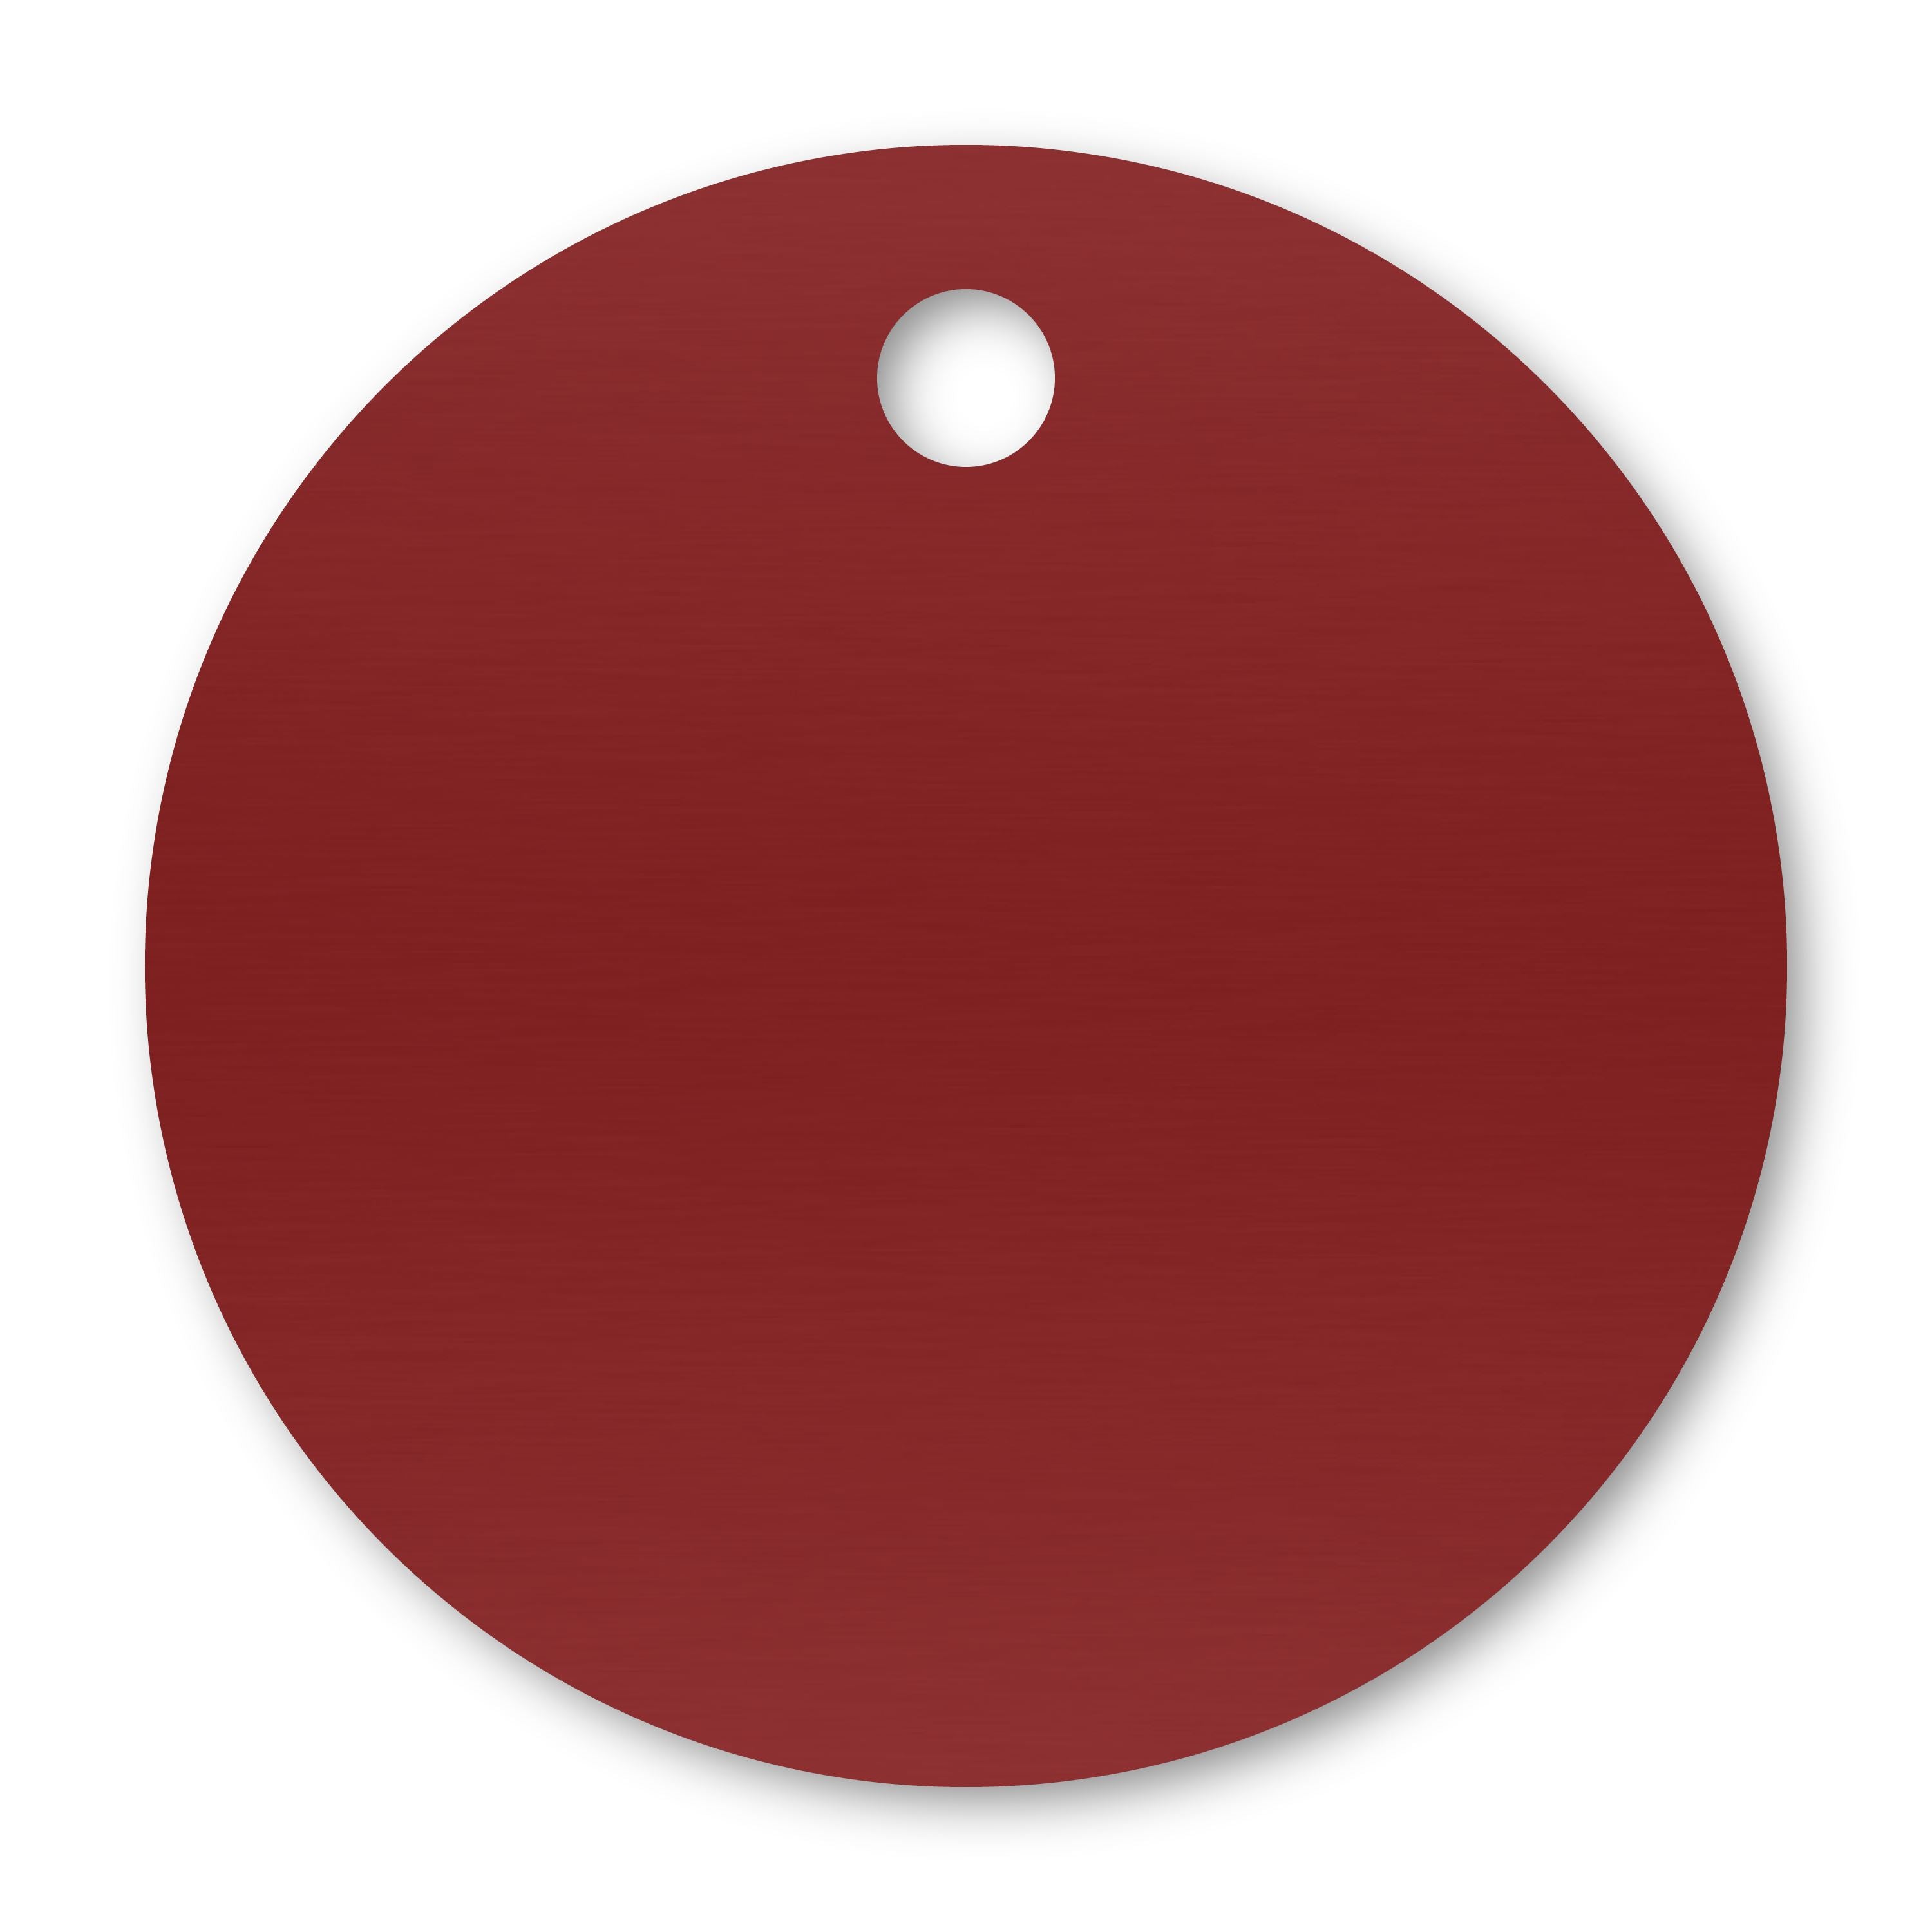 Anodized Aluminum Round Tags, 1-1/4" with 1/8" Hole, Laser Engraved Metal Tags Craftworks NW Red 